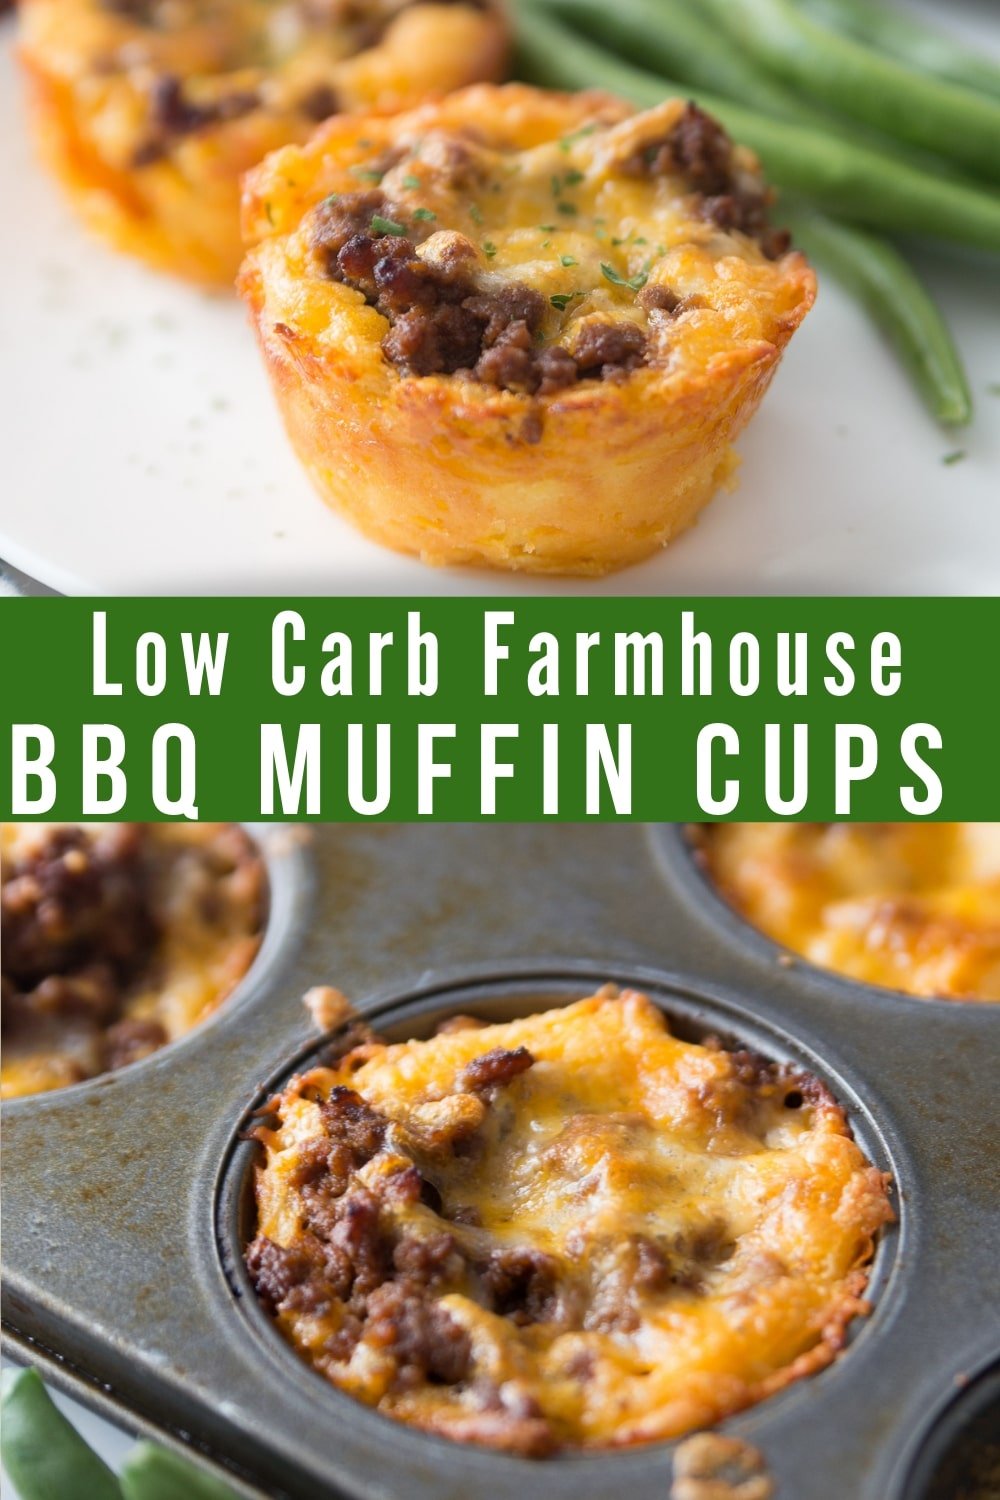 Farmhouse BBQ Low Carb Muffin Cups are loaded with tangy sugar-free low carb bbq sauce and cheesy goodness for an easy and delicious keto dinner idea. #keto #lowcarb